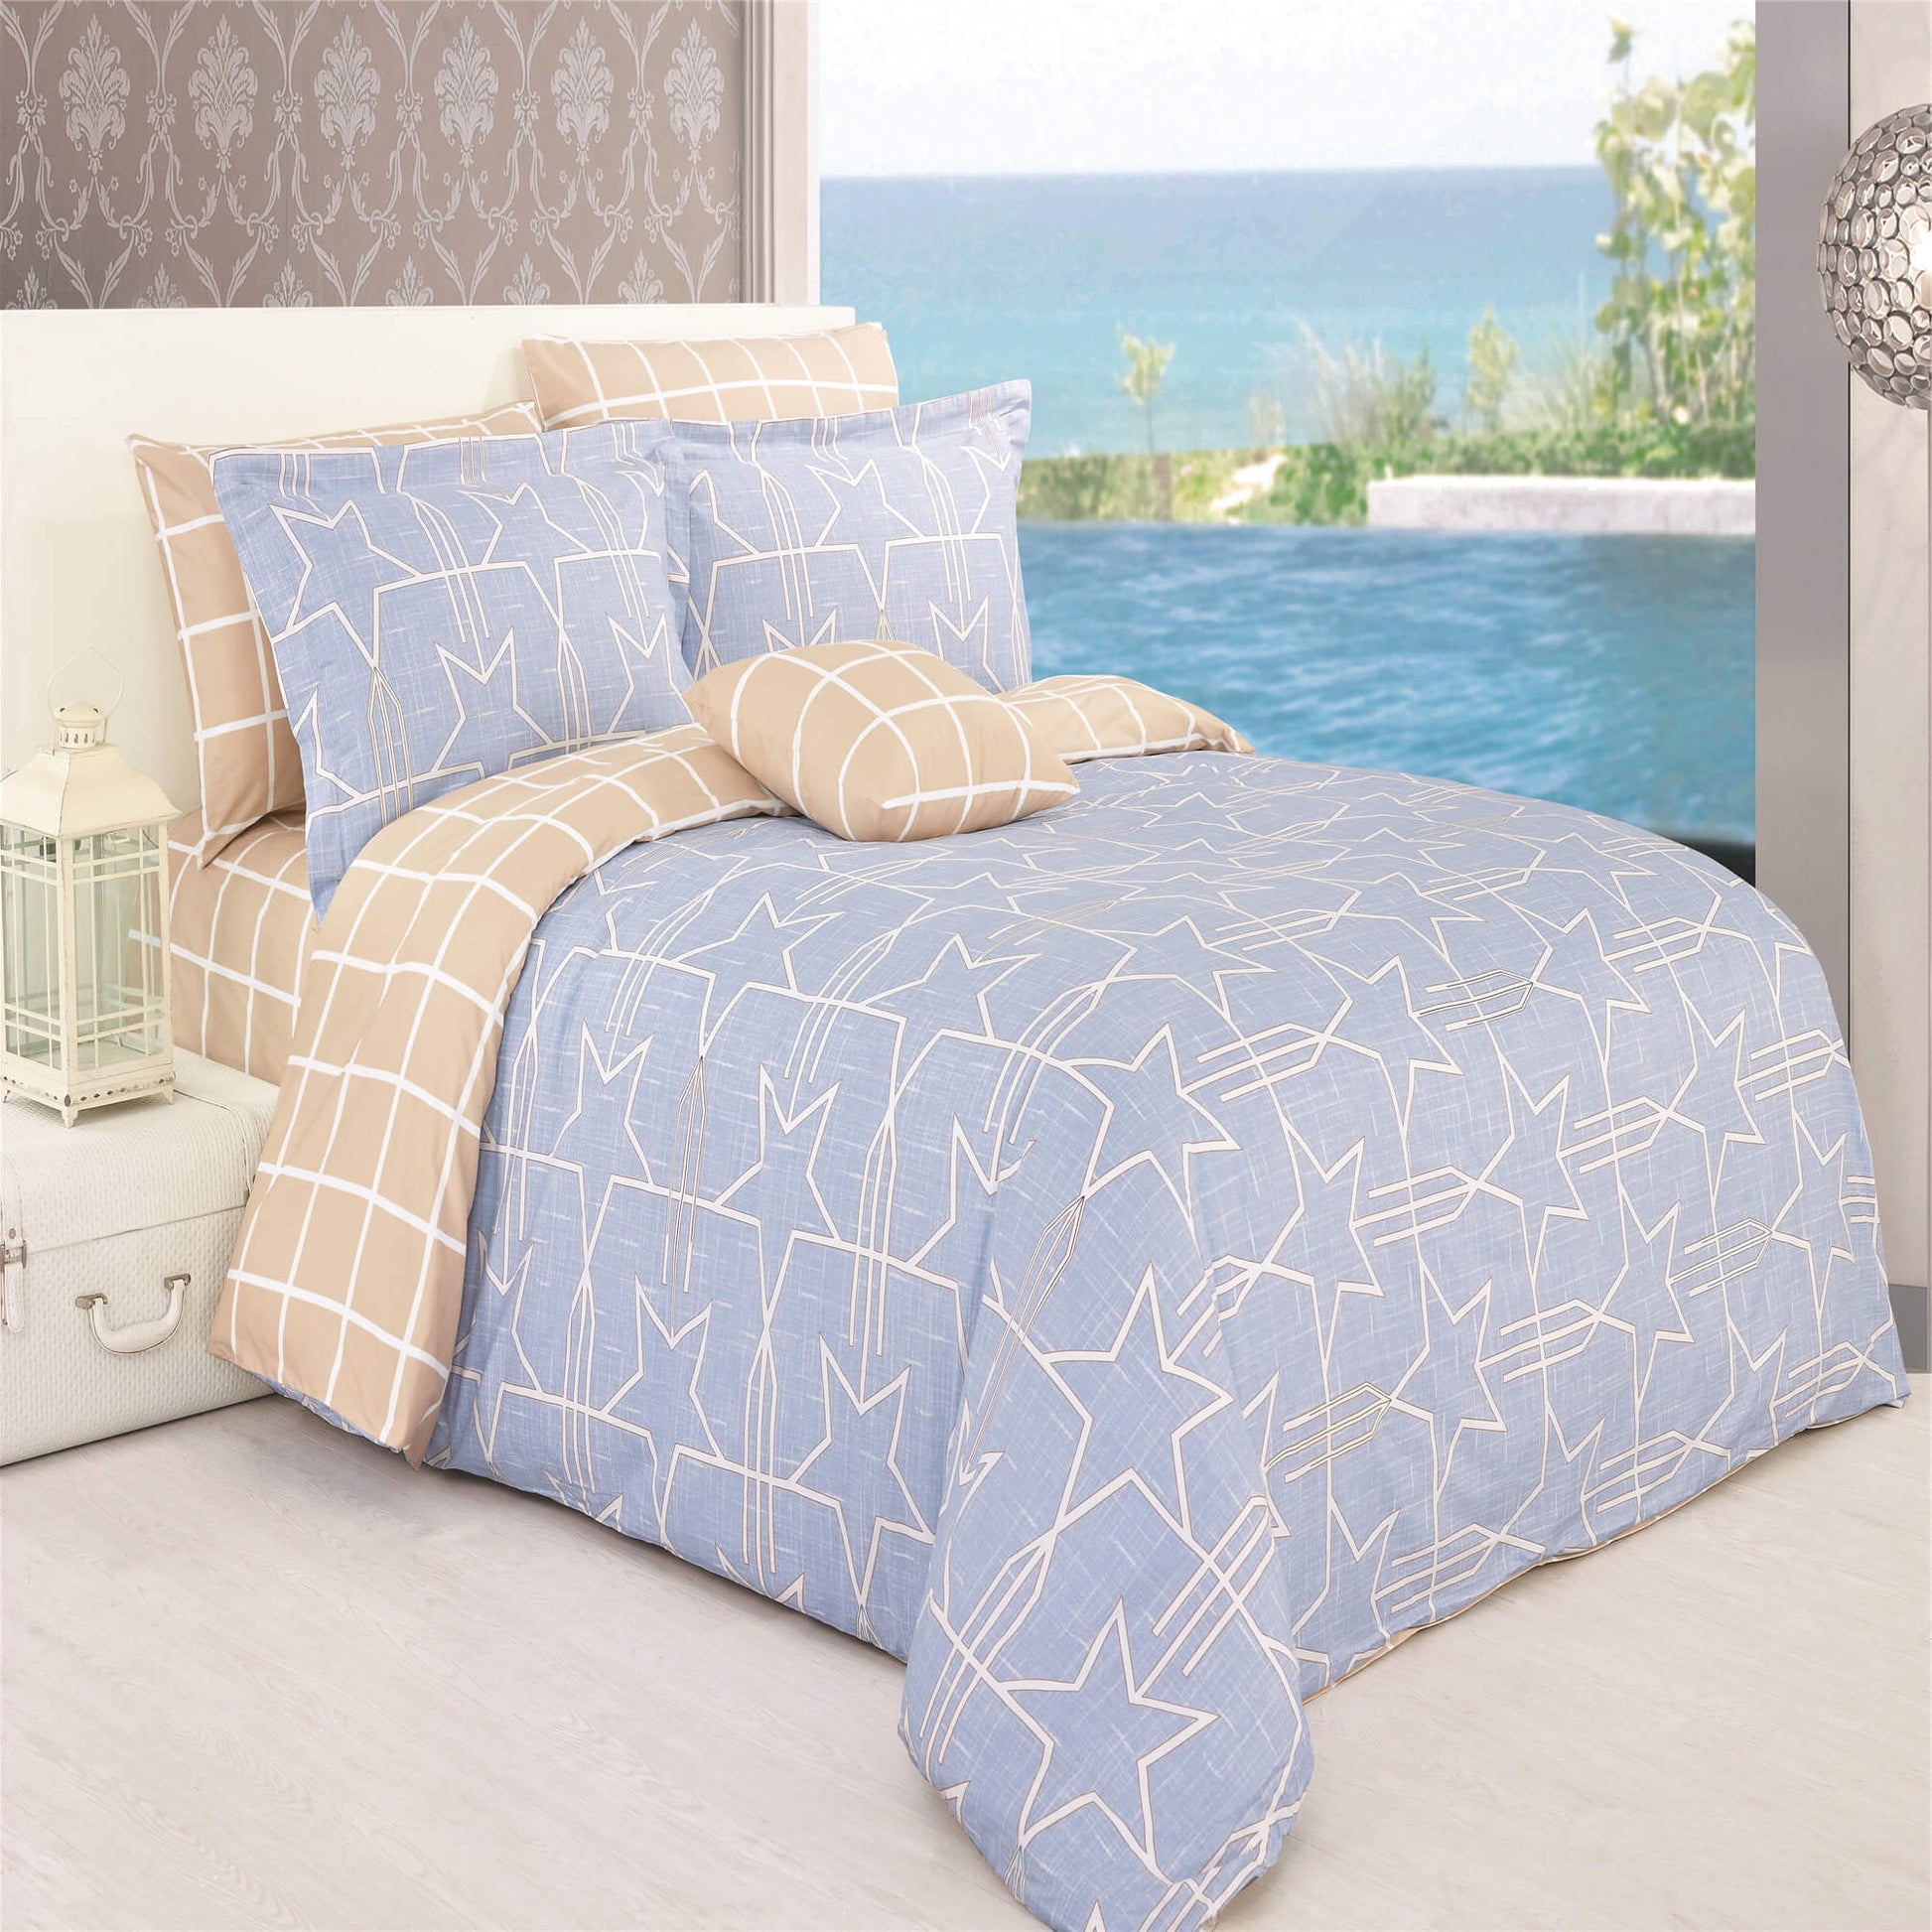 Twinkle Duvet Cover Set freeshipping - North Home